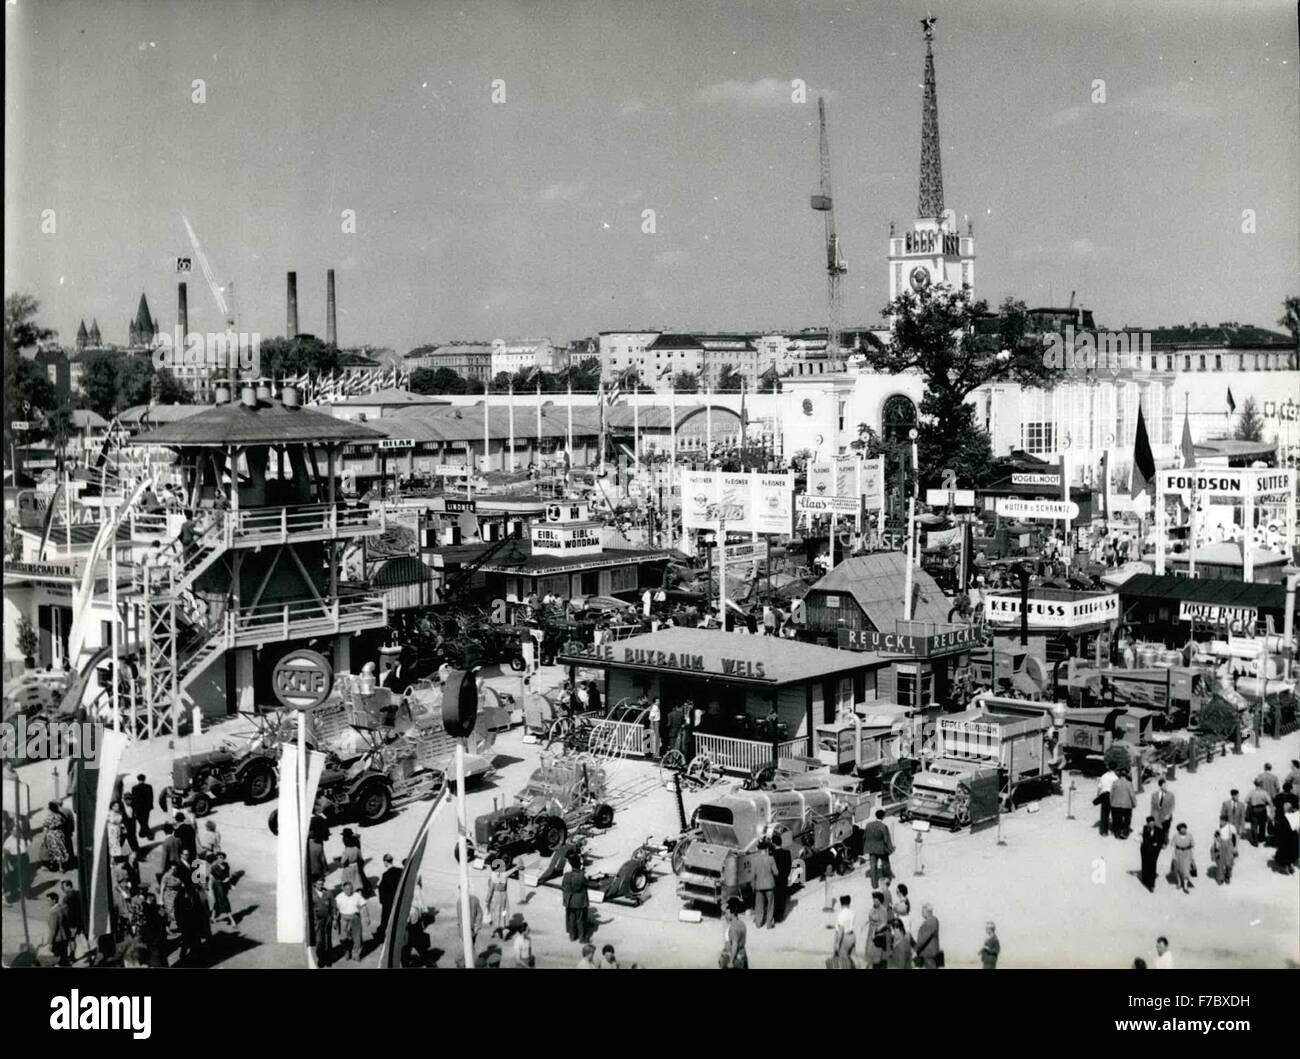 1954 - International Autumn Mass 1954 in Vienna which celebrates by this year opening its 60th anniversary, spreads far over the exhibition districts of the Prater. Our picture gives a general view. Keystone Picture of Sept. 13th 54 (Credit Image: © Keystone Pictures USA/ZUMAPRESS.com) Stock Photo